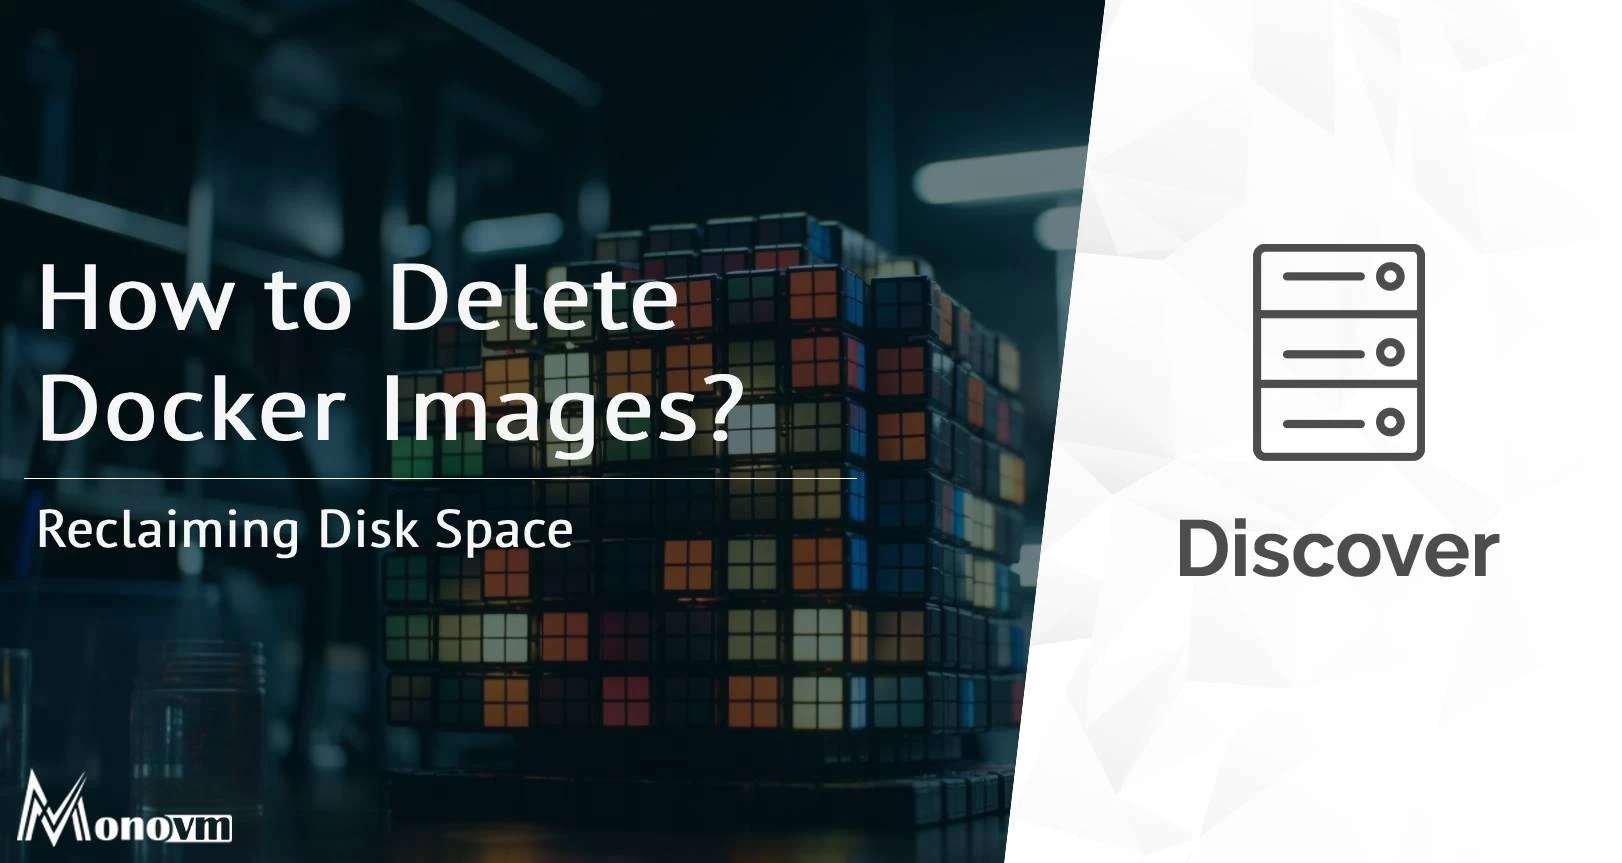 How to Delete Docker Images: Reclaiming Disk Space